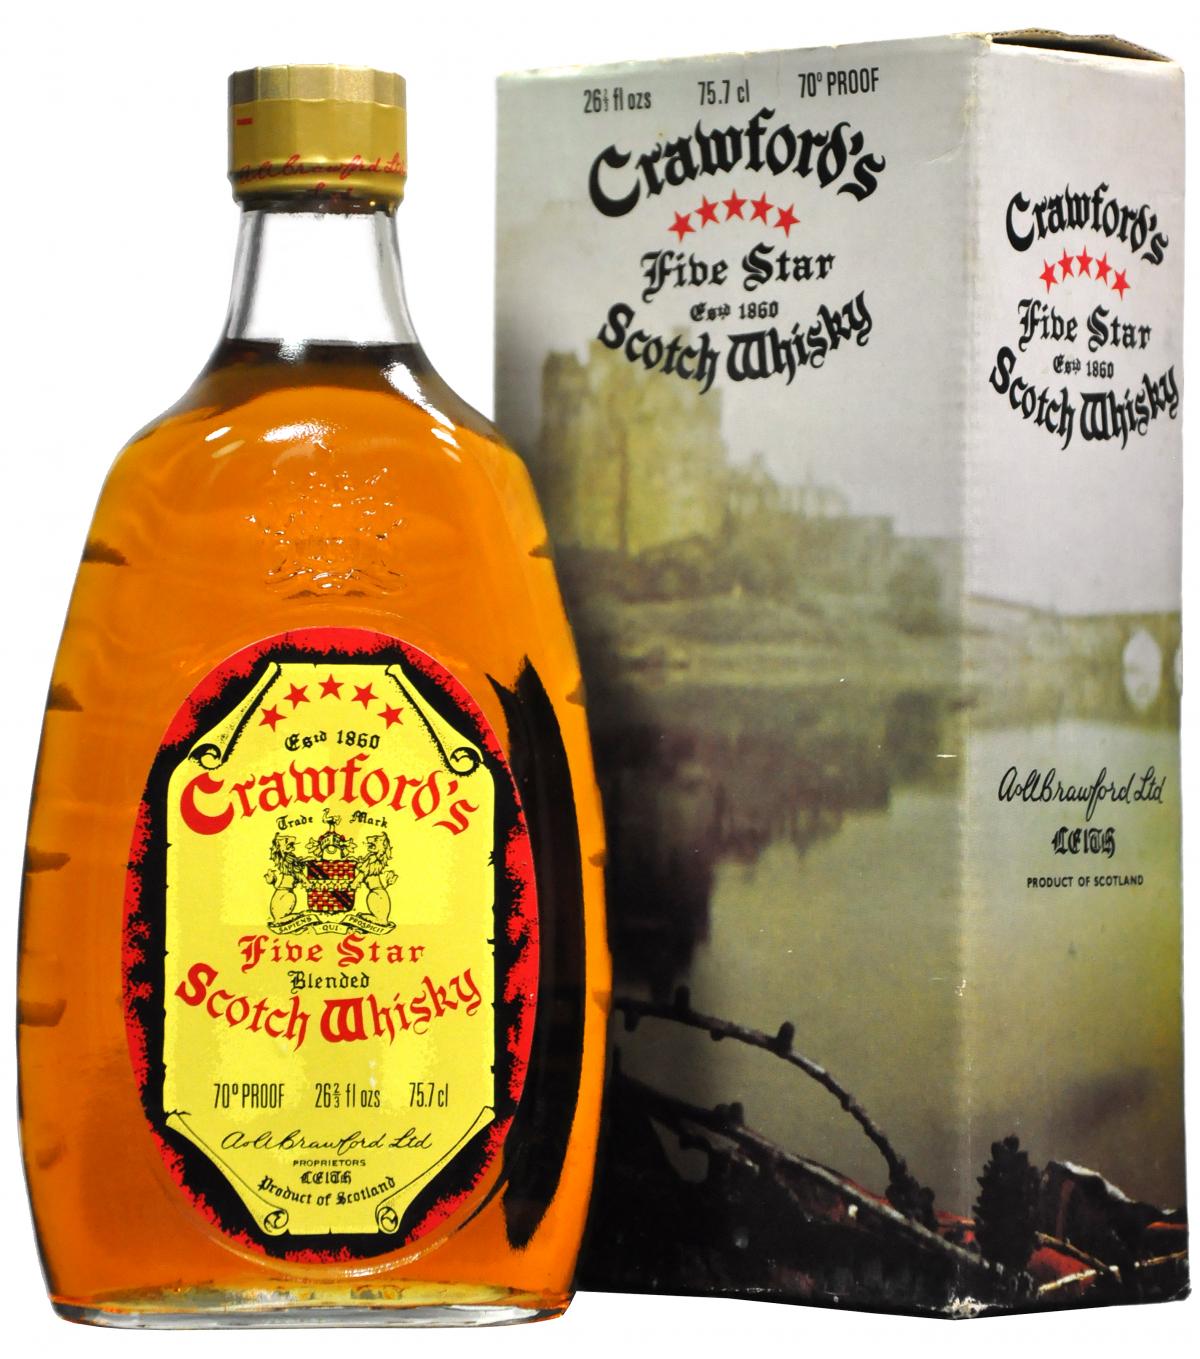 crawfords 5 star, blended scotch whisky,